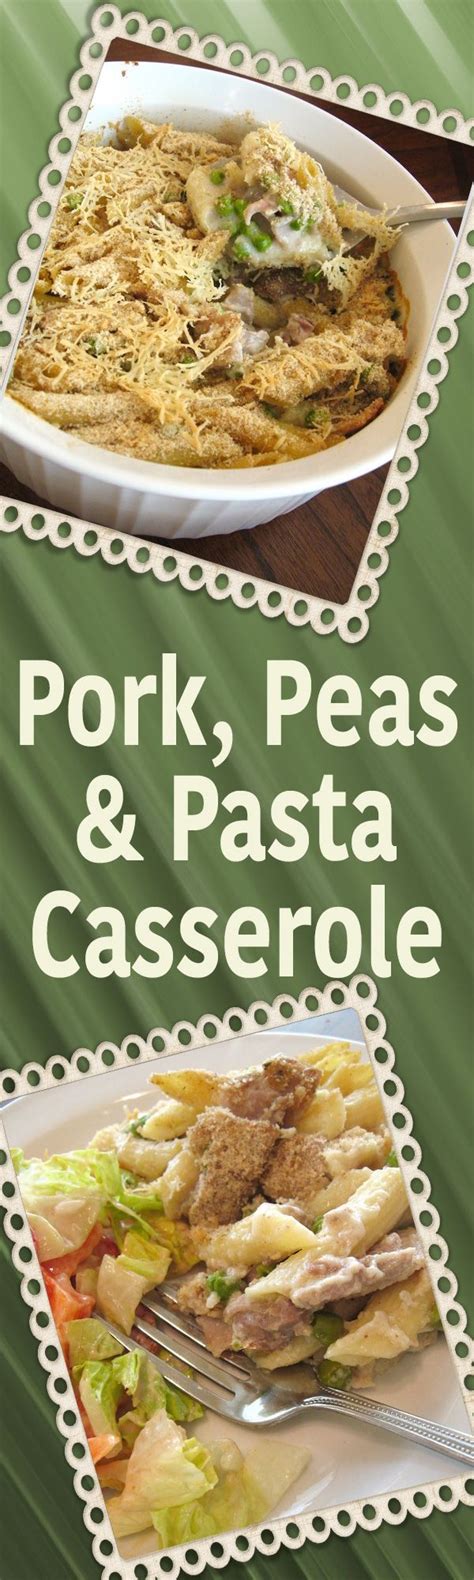 Pork enchilada casserole makes plenty, which means it is the perfect meal for a large family or for bringing to a potluck. Pork Peas & Pasta Casserole | Leftover pork recipes, Pork ...